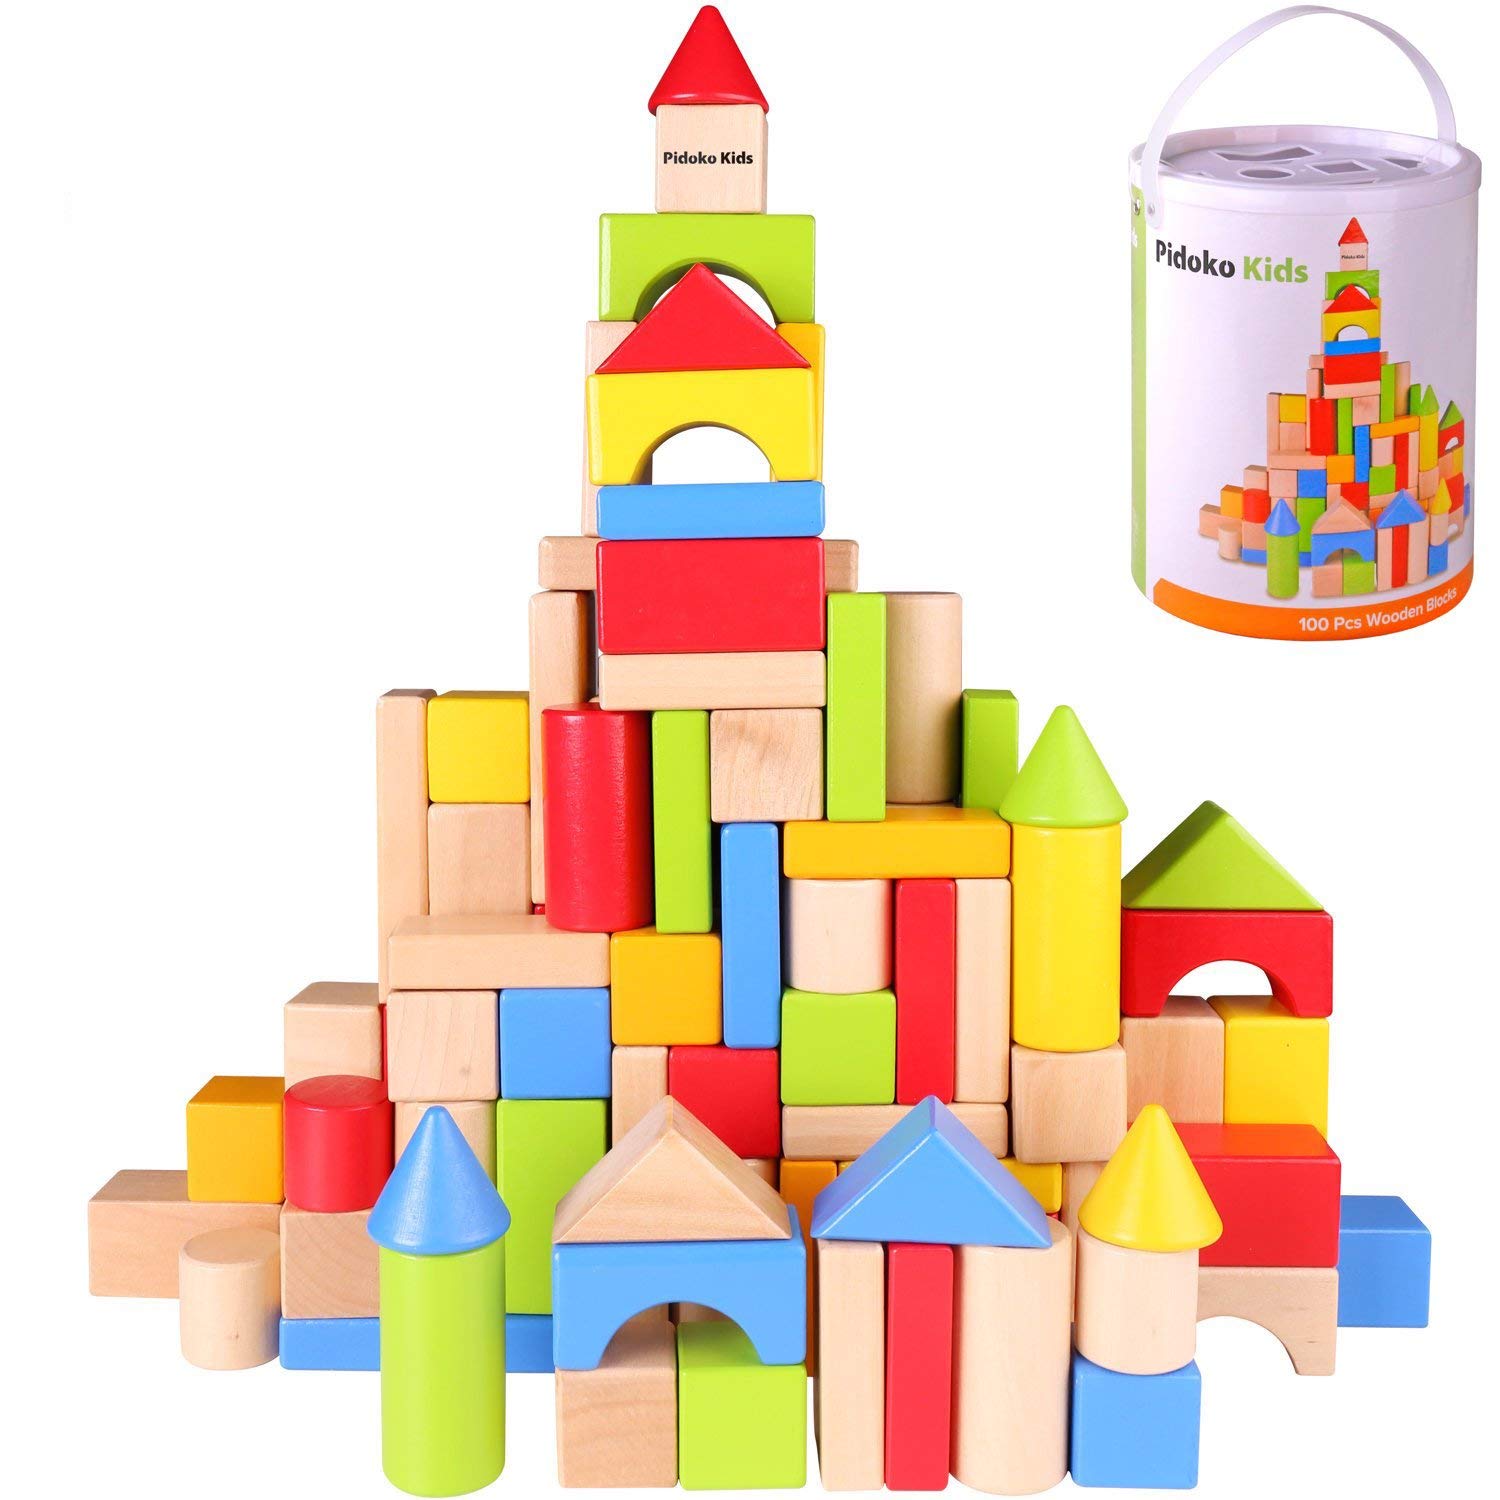 Pidoko Kids Wooden Building Blocks Set - 100 Pcs - Includes Carrying  Container - Hardwood Plain  Colored Wood Block for Boys  Girls -  Walmart.com